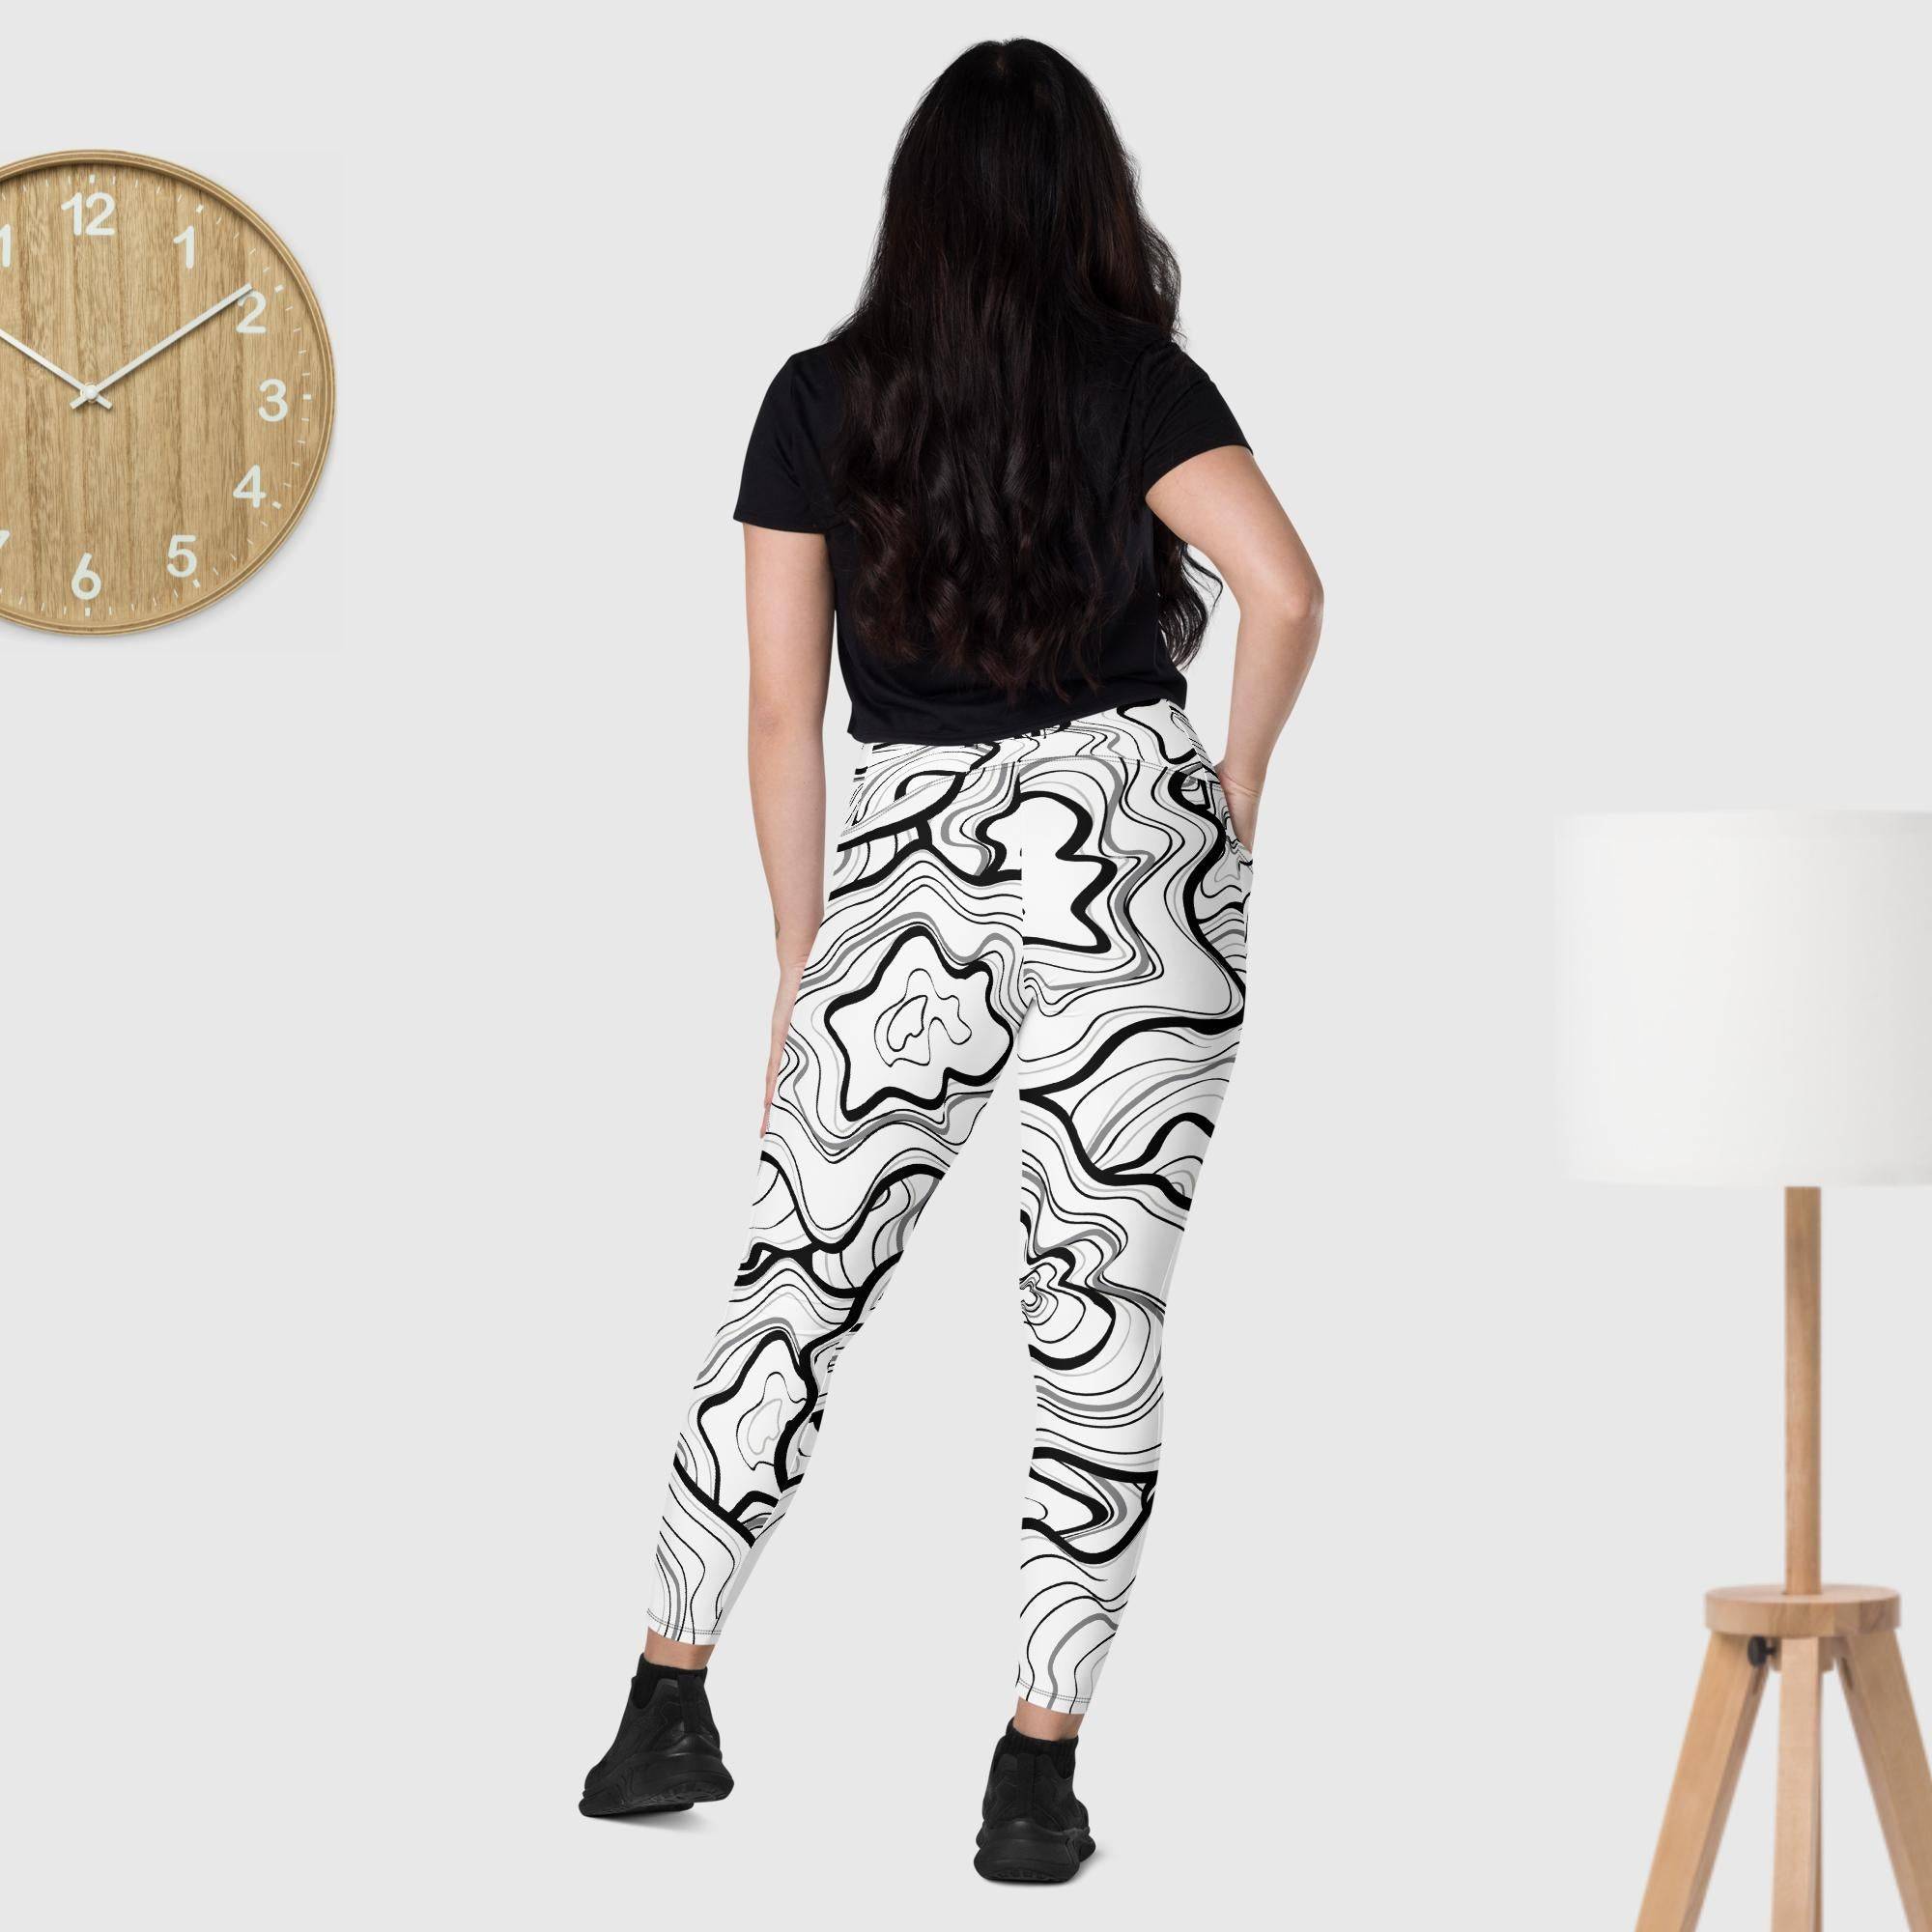 Black Fitness Leggings with Phone Pocket - Revive Wear     Black fitness leggings with phone pocket provides maximum performance. The four-way stretch fabric moves with you while the side pockets keep your phone close. Shop today.